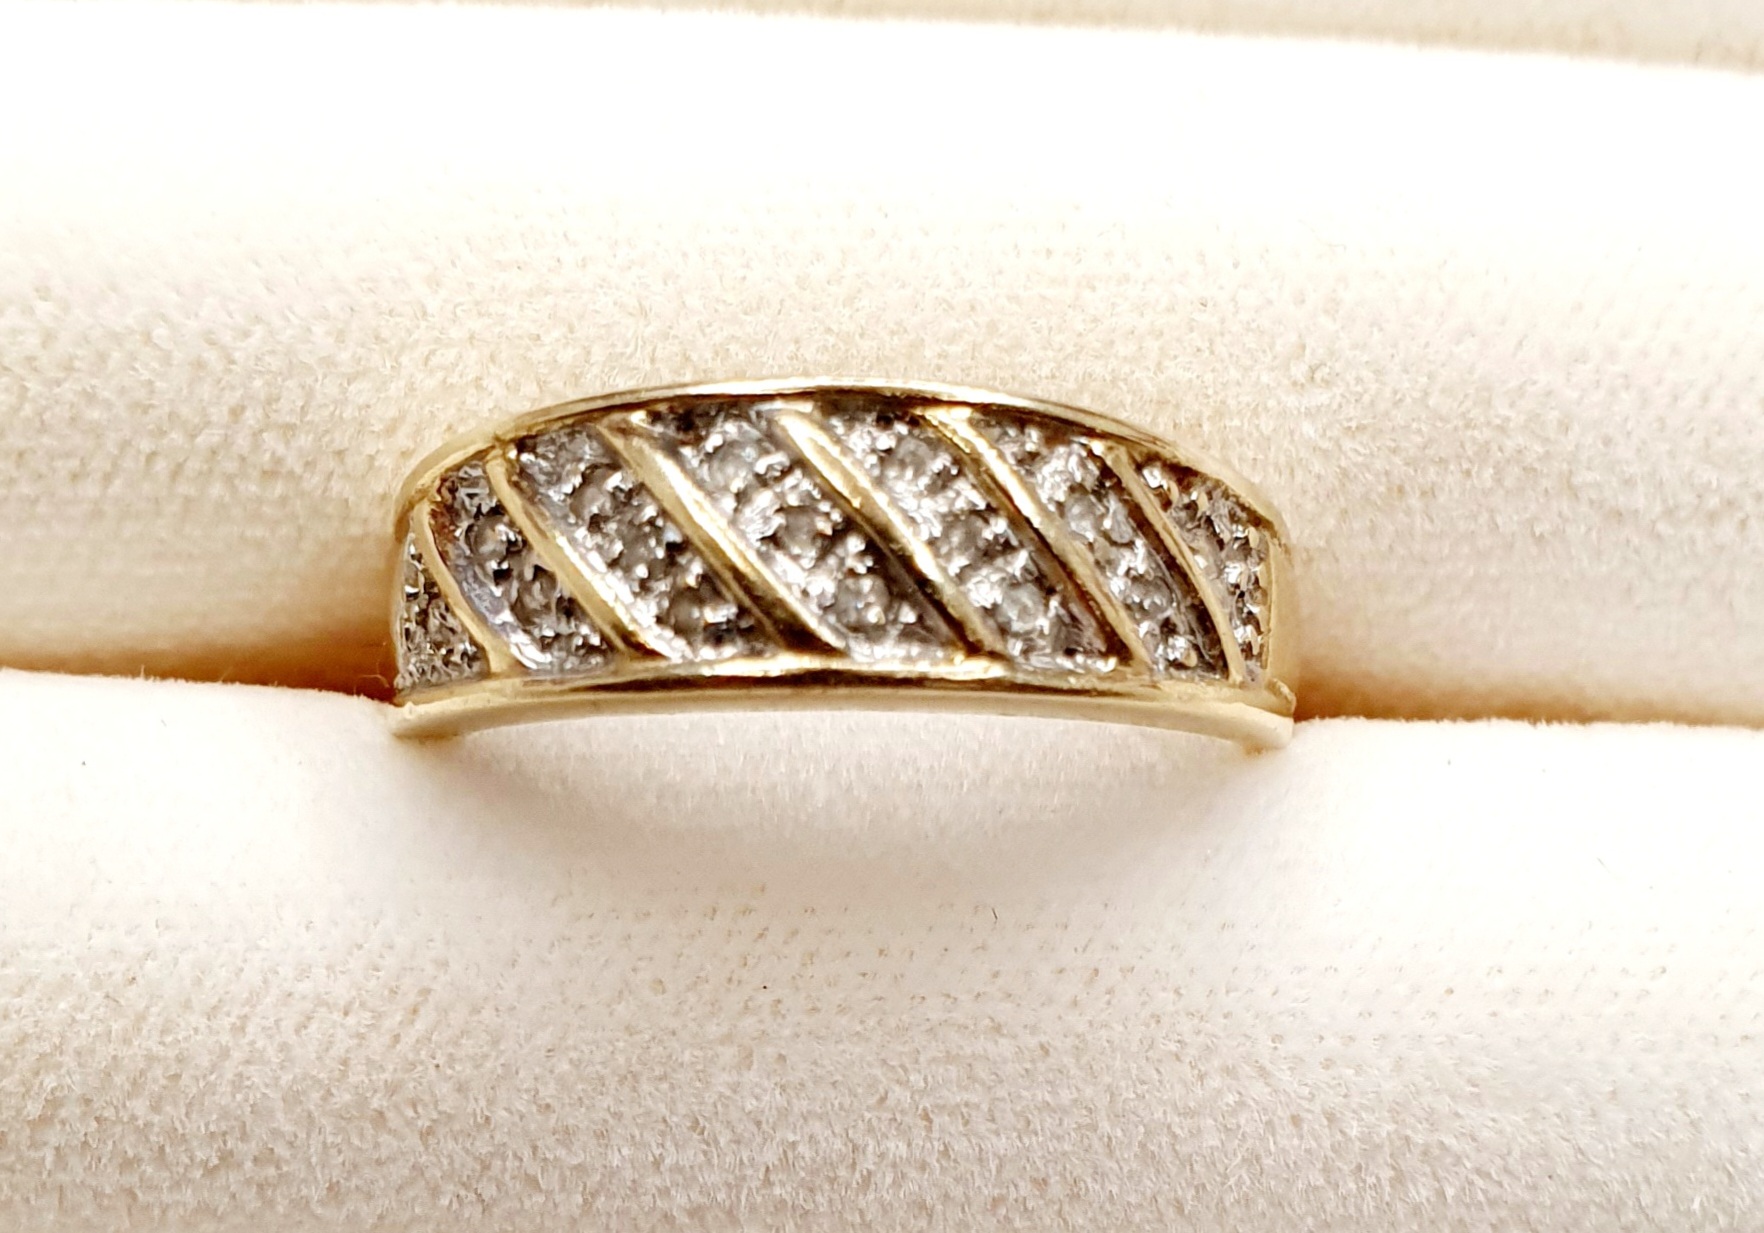 9ct Gold Ring set with small diamond chips, weight 3.04g, Size N